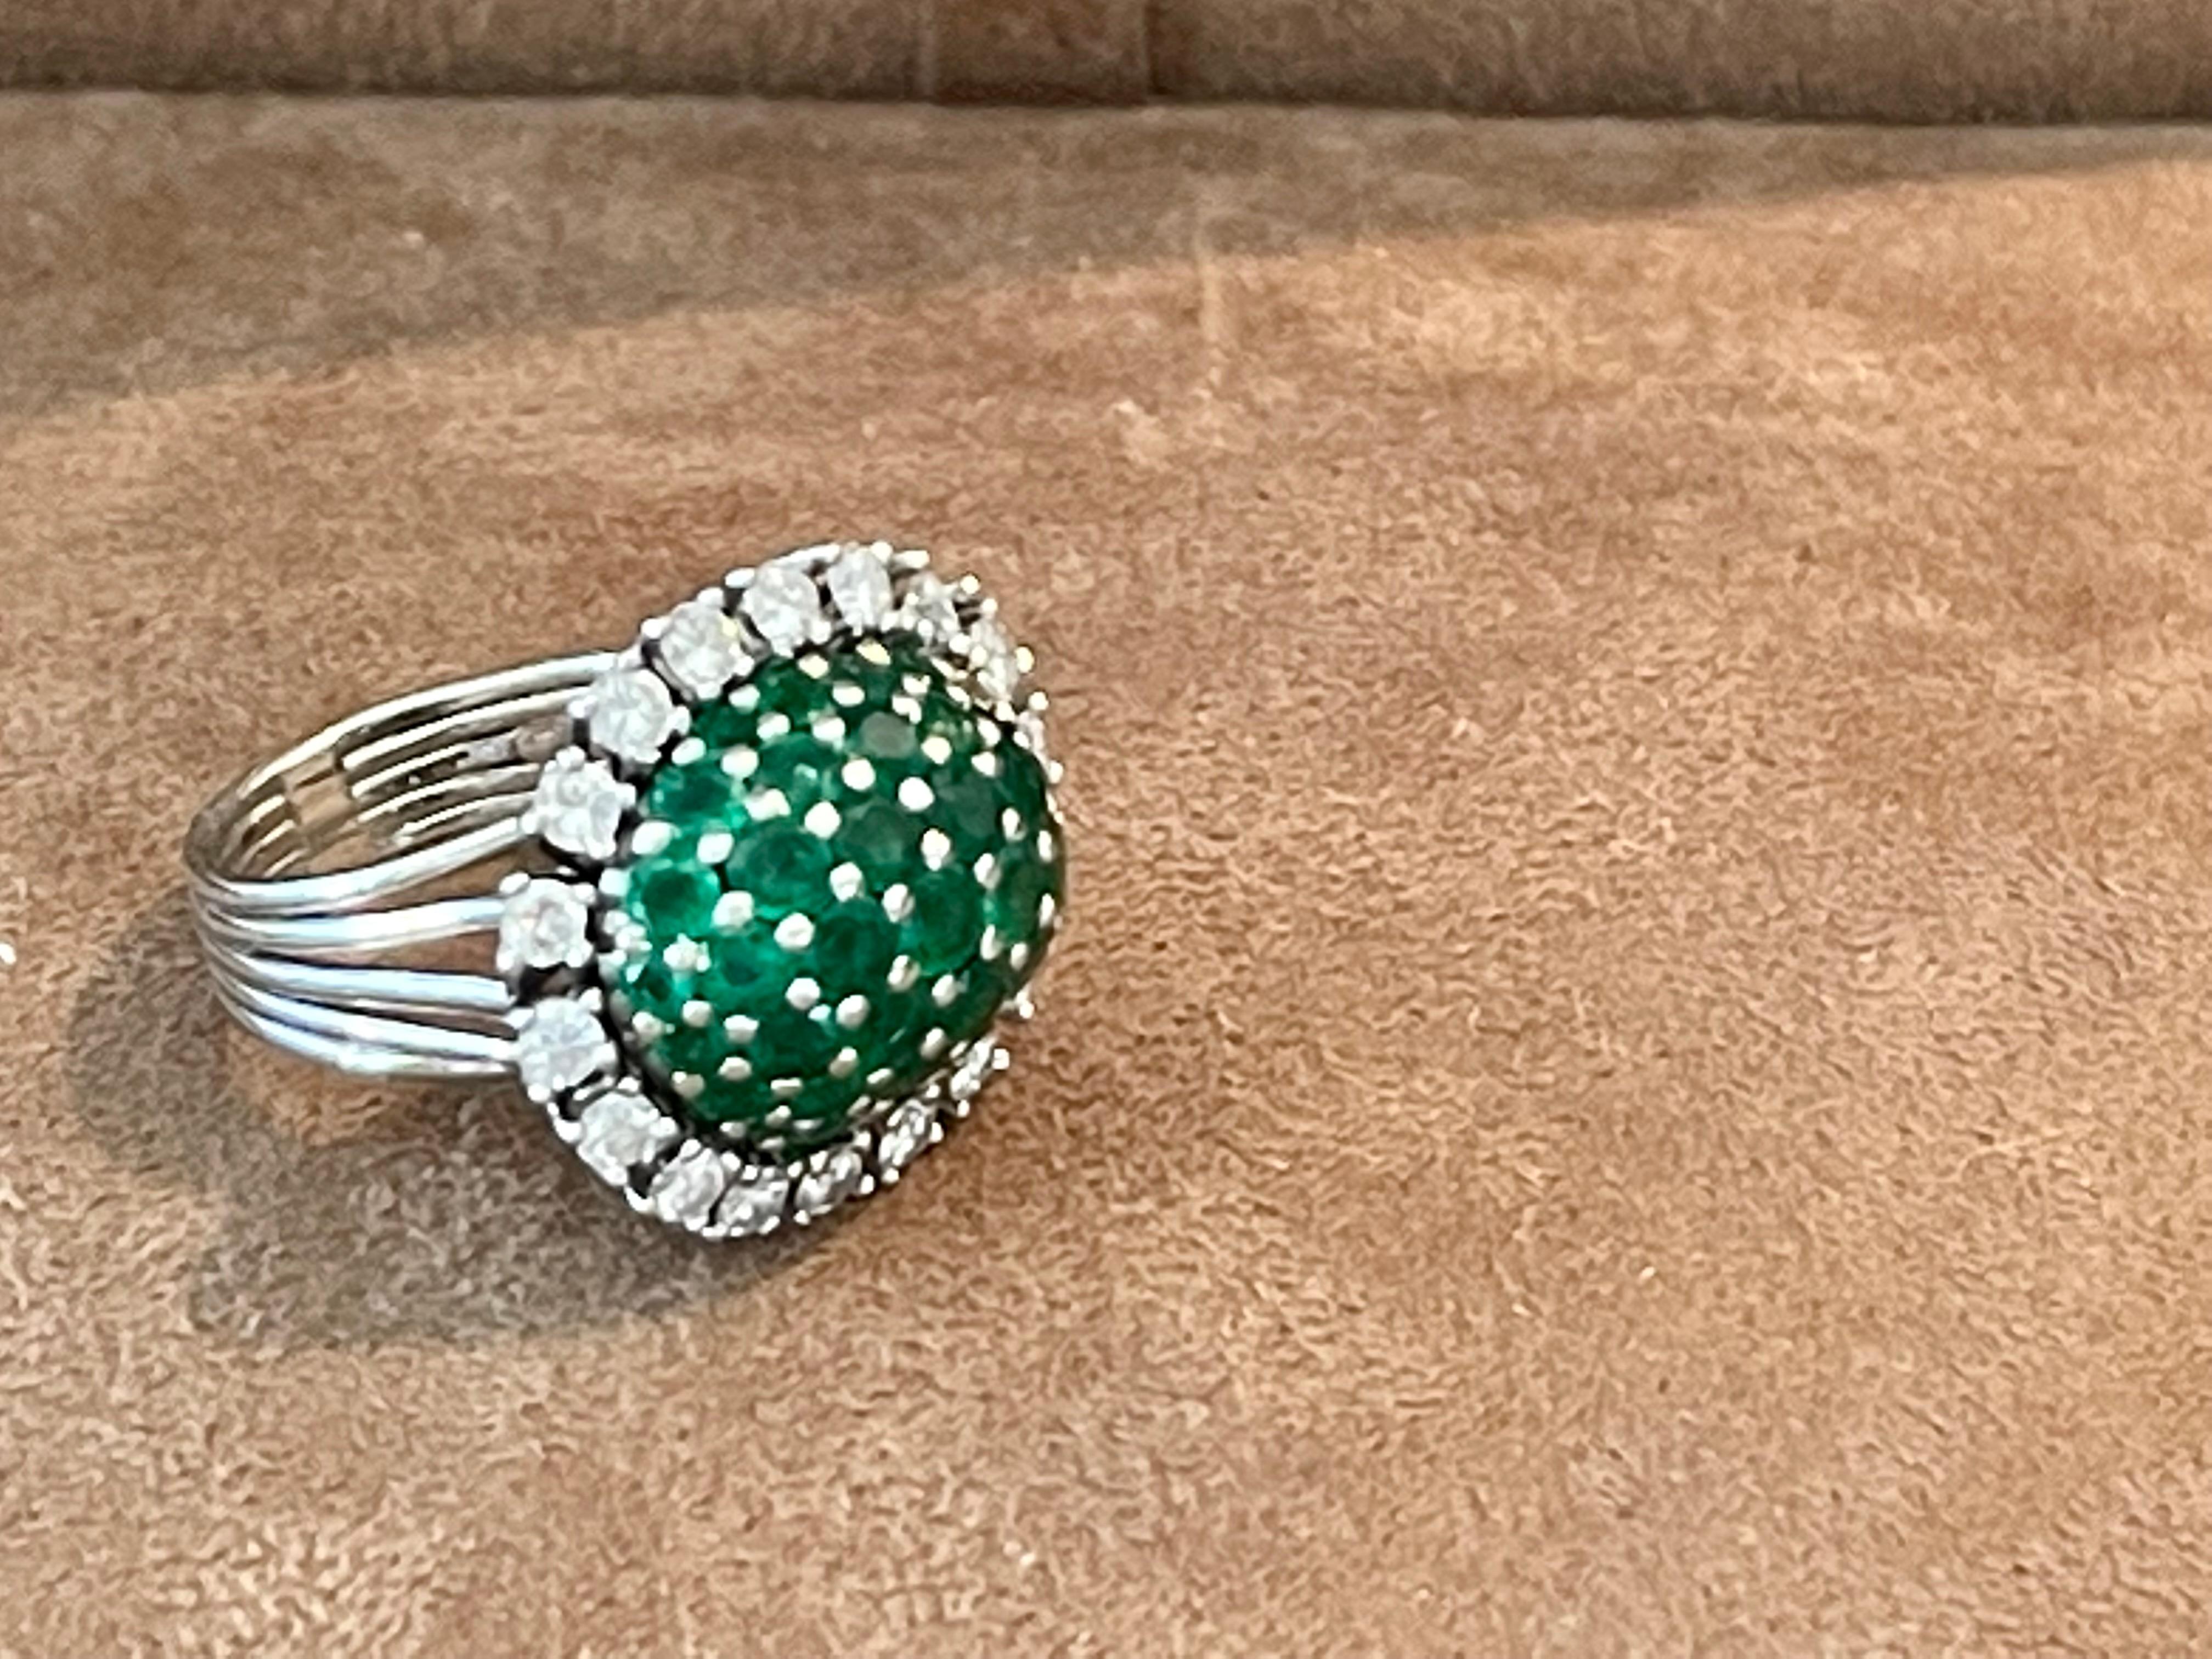 Lovely Platinum Vintage Ring featruing 30 brilliant cut Emeralds weighing approximately 2.50 ct in a surrounding of 18 brilliant cut Diamonds weighing approximately 0.80 ct, G color, vs clarity. 
The ring is currently size 51/11( american Ring size